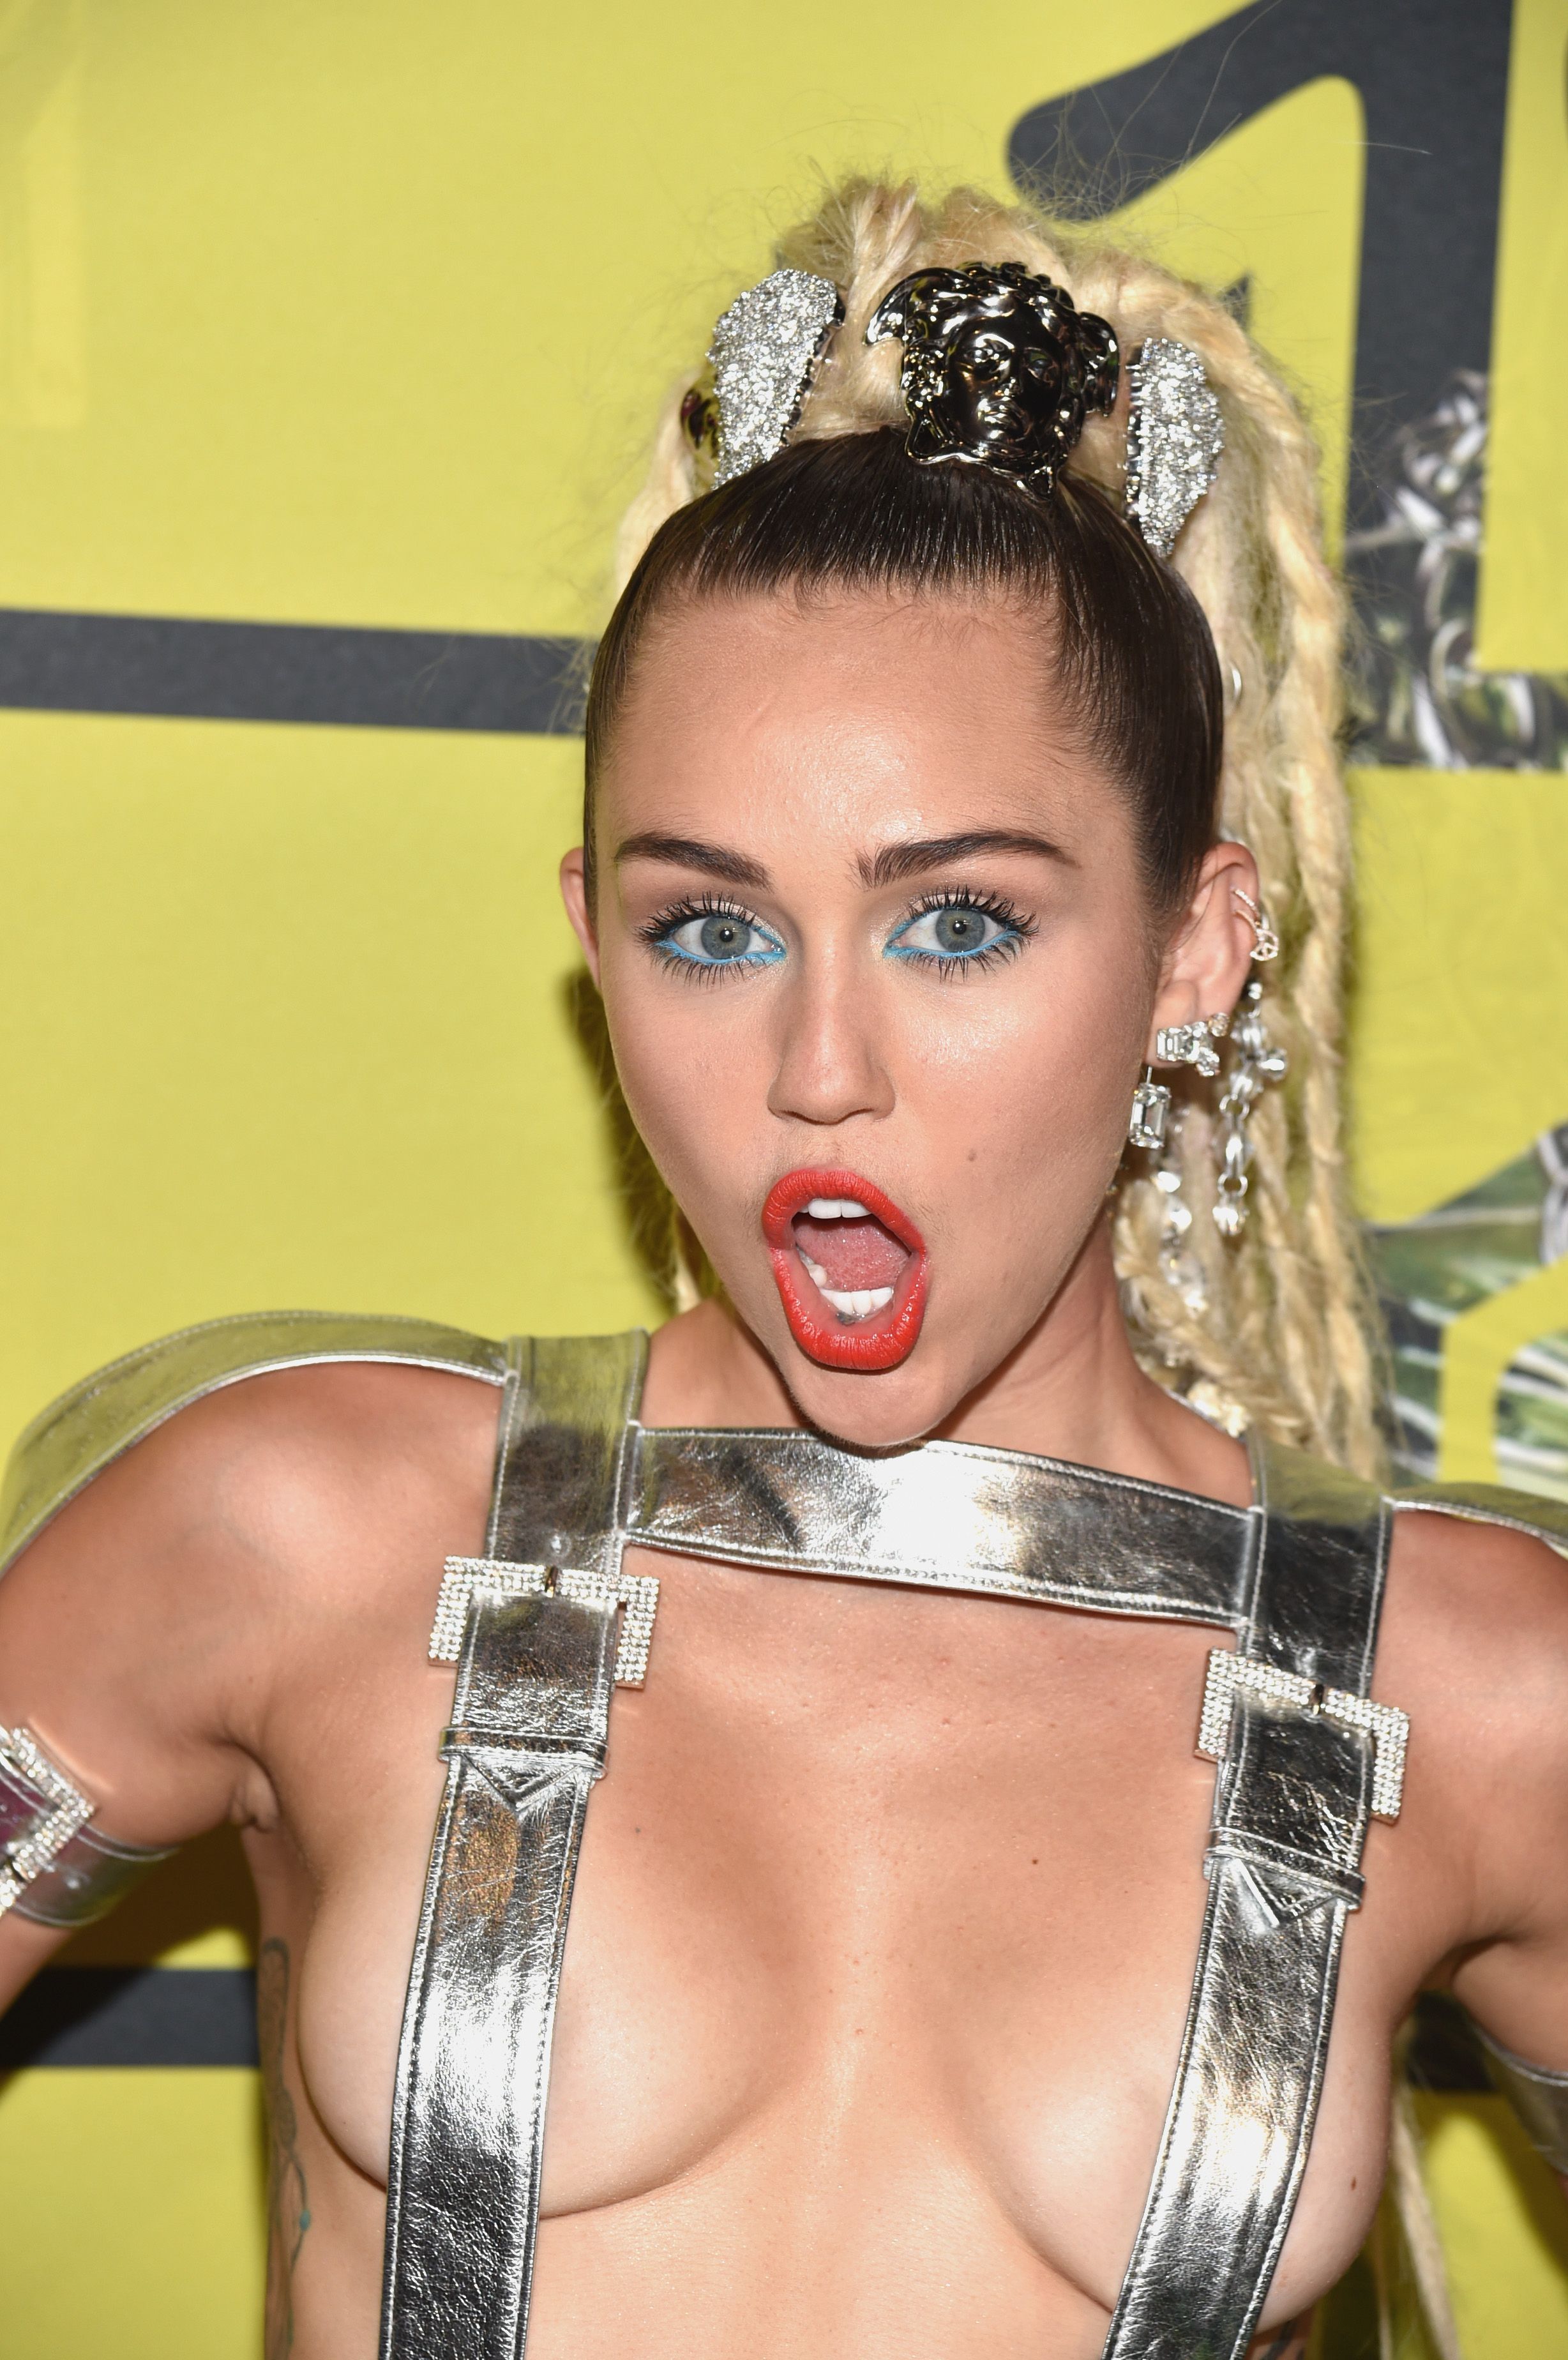 Miley Cyrus Real - Miley Cyrus Real Porn Of course this wouldnt be the first time that Miley  was caught on camera diddling her cock cave for she famously partook in  some immoral self-pleasuring while on